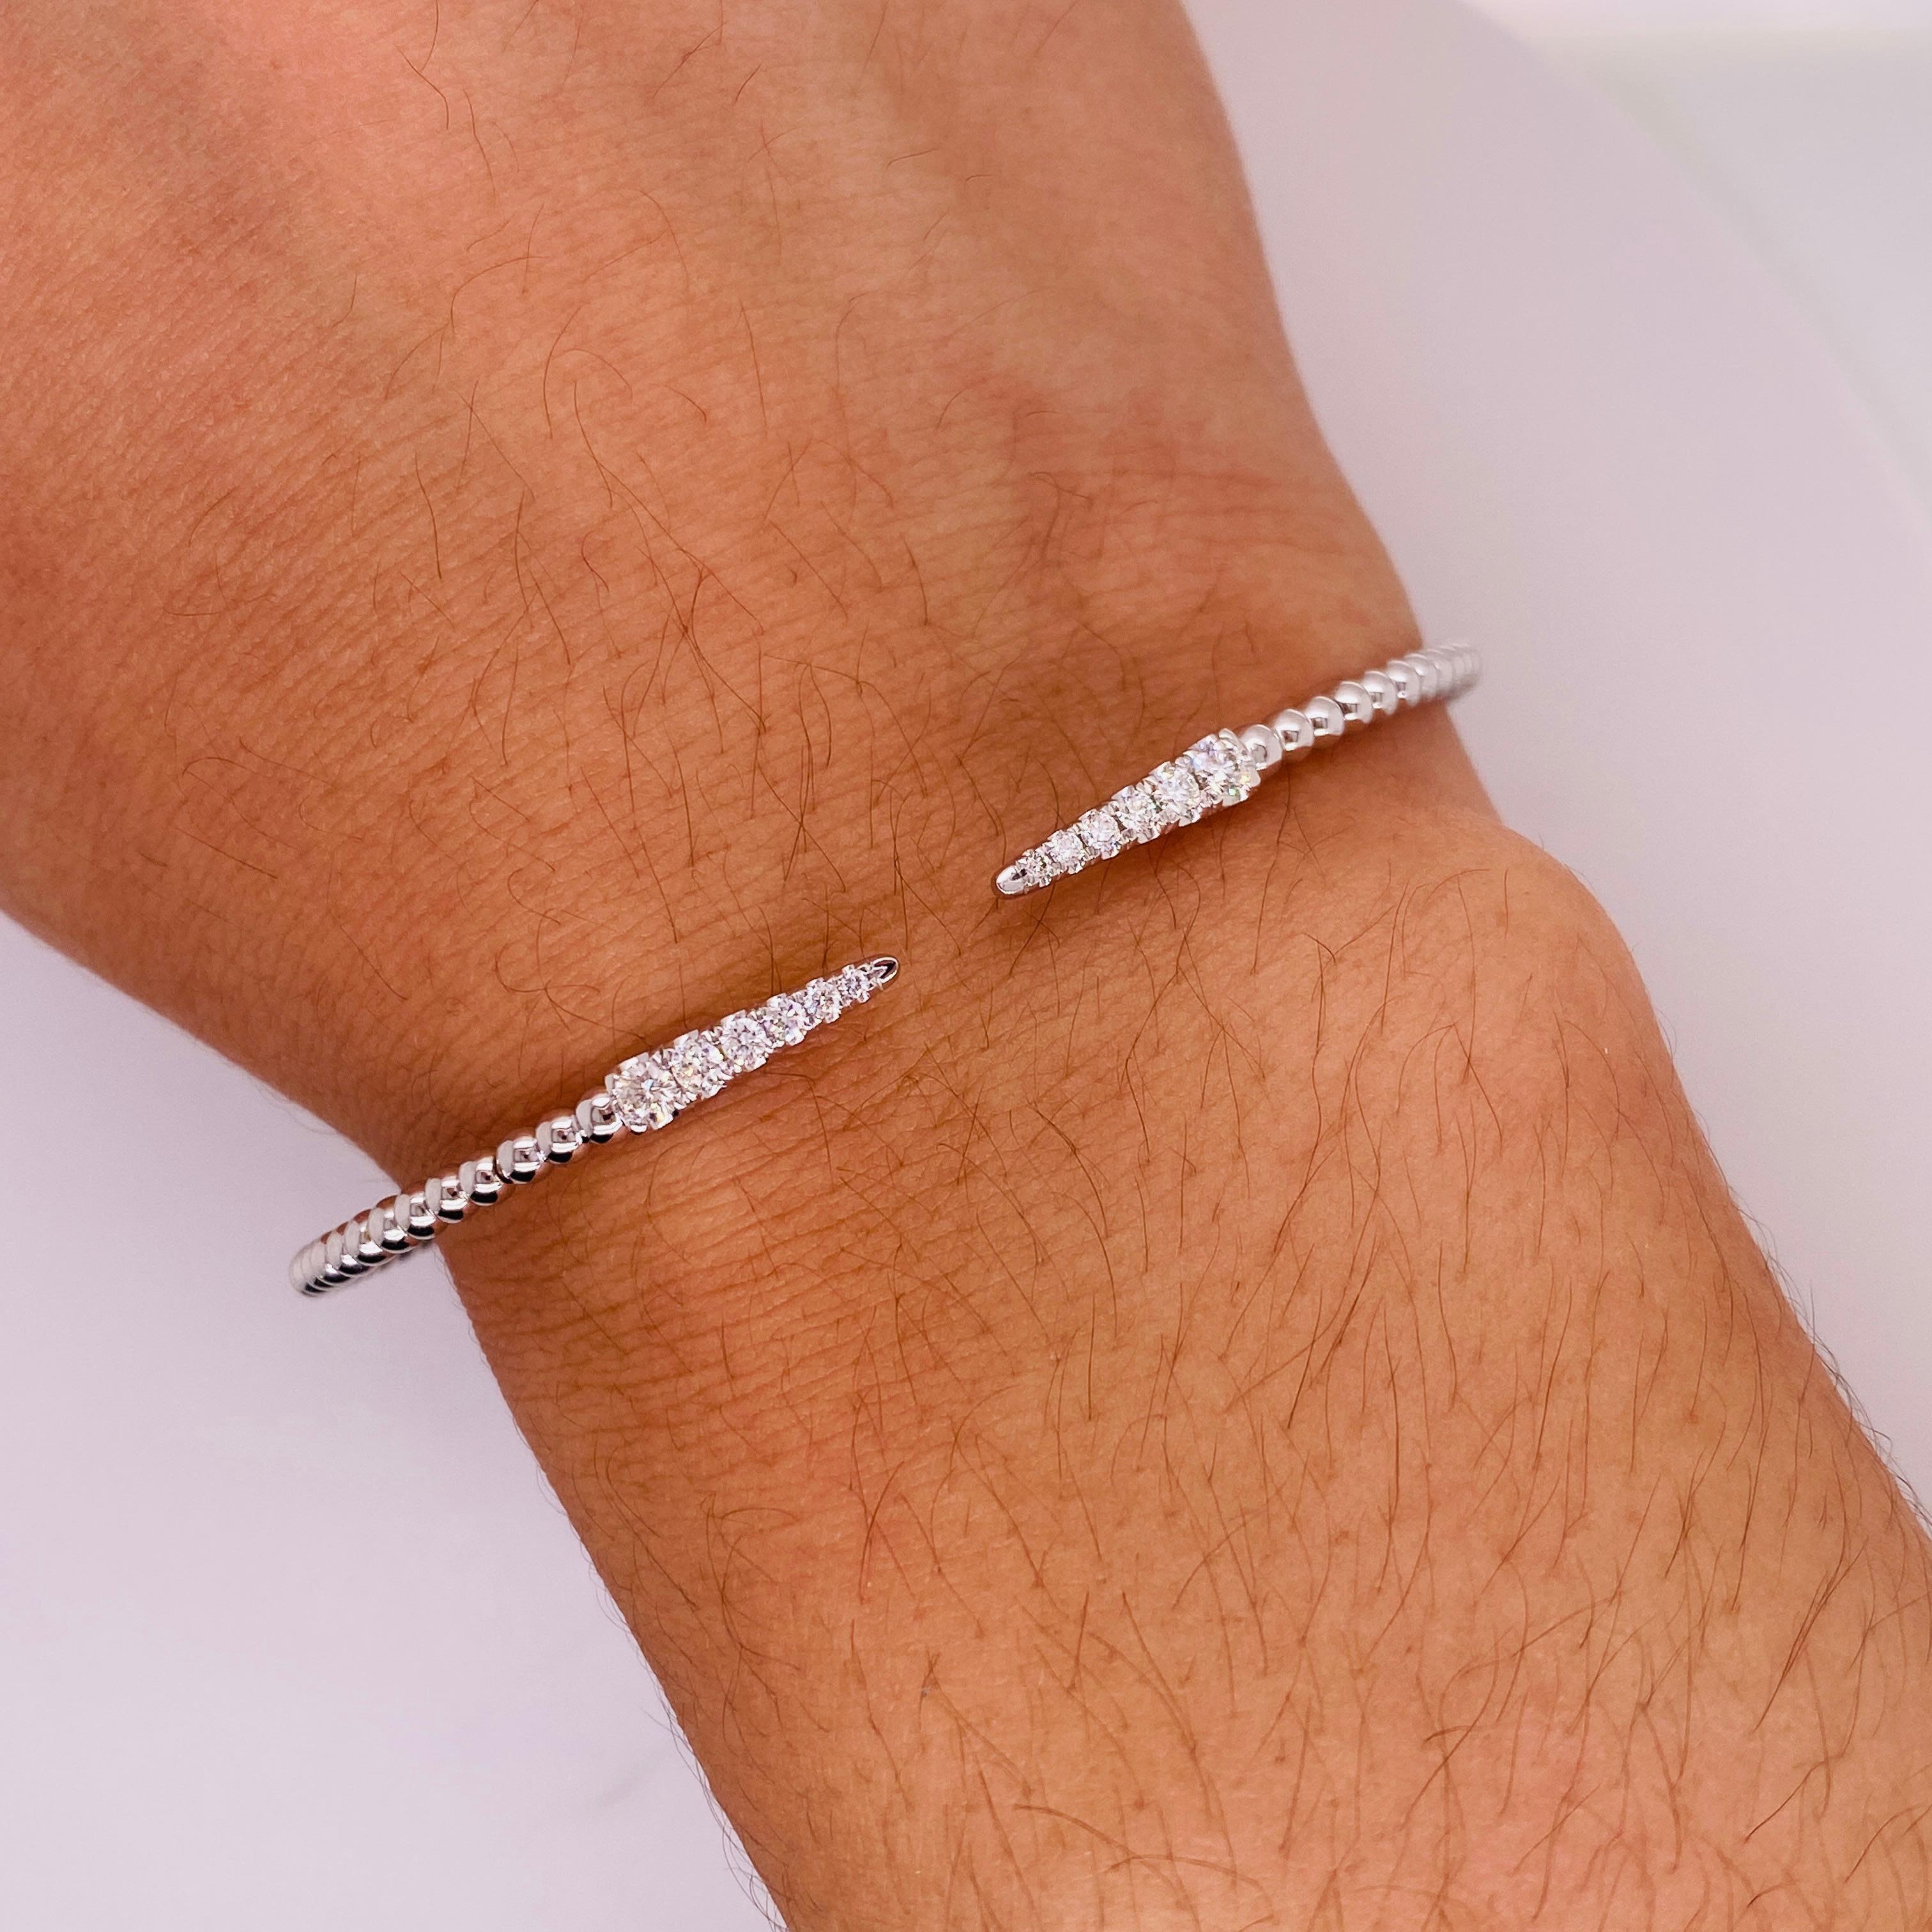 This bracelet overturns standard cuff bracelet design by making the cuff opening the focal point! Tapering round brilliant diamonds shine bright along the sleek and edgy spikes. Beautifully slender and comfortable, this low-profile bangle bracelet